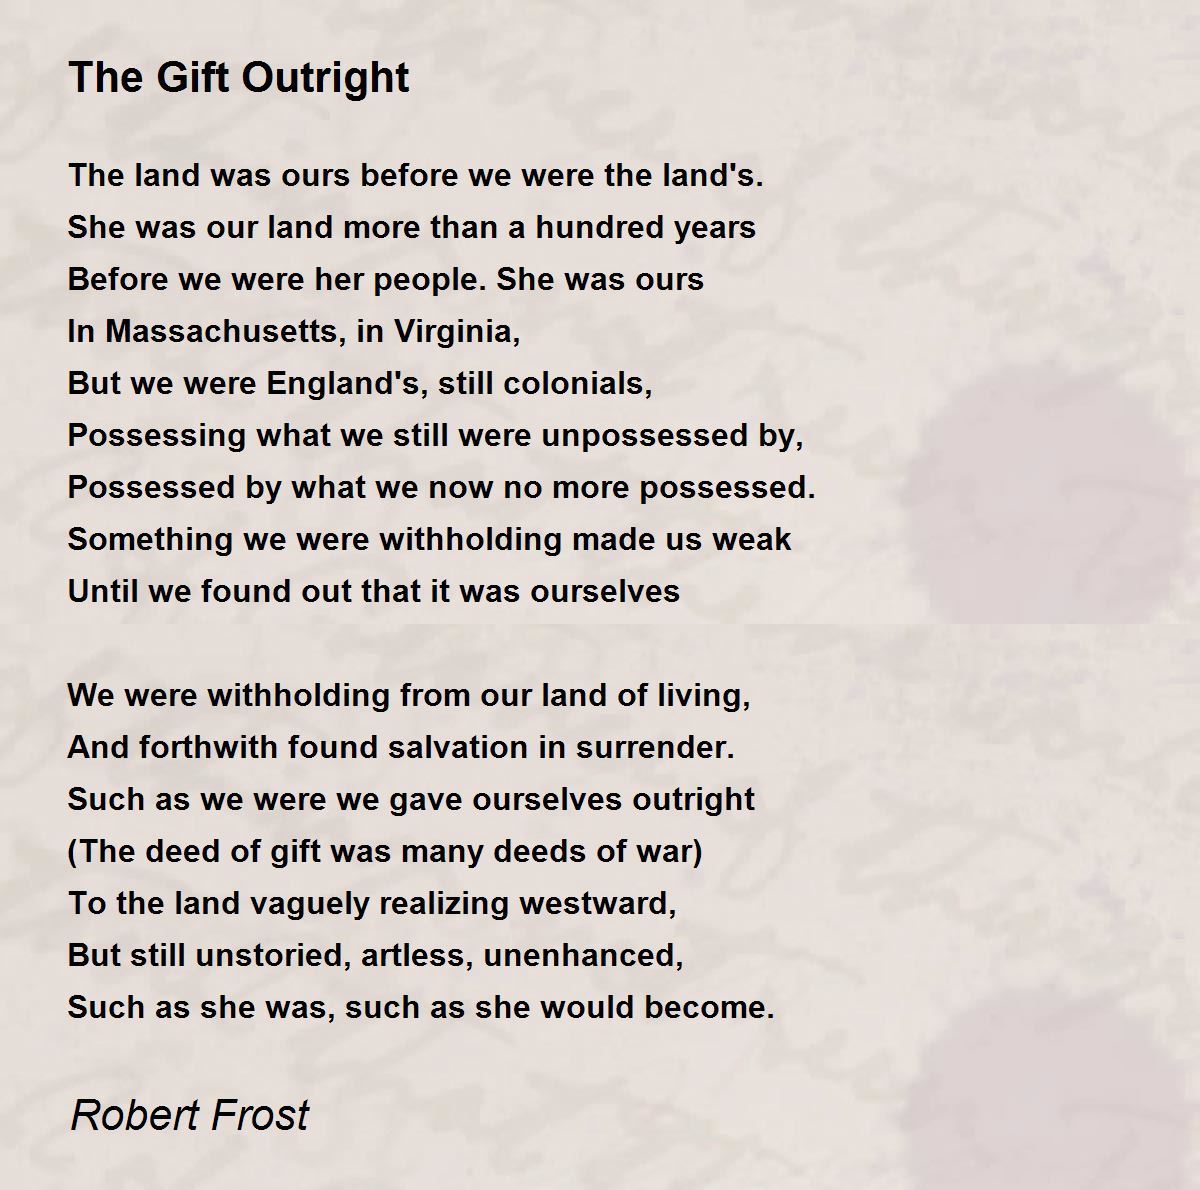 Malta Libraries - Did you know? 🤔⁉️📚 The 87-year-old #RobertFrost recited  his poem 